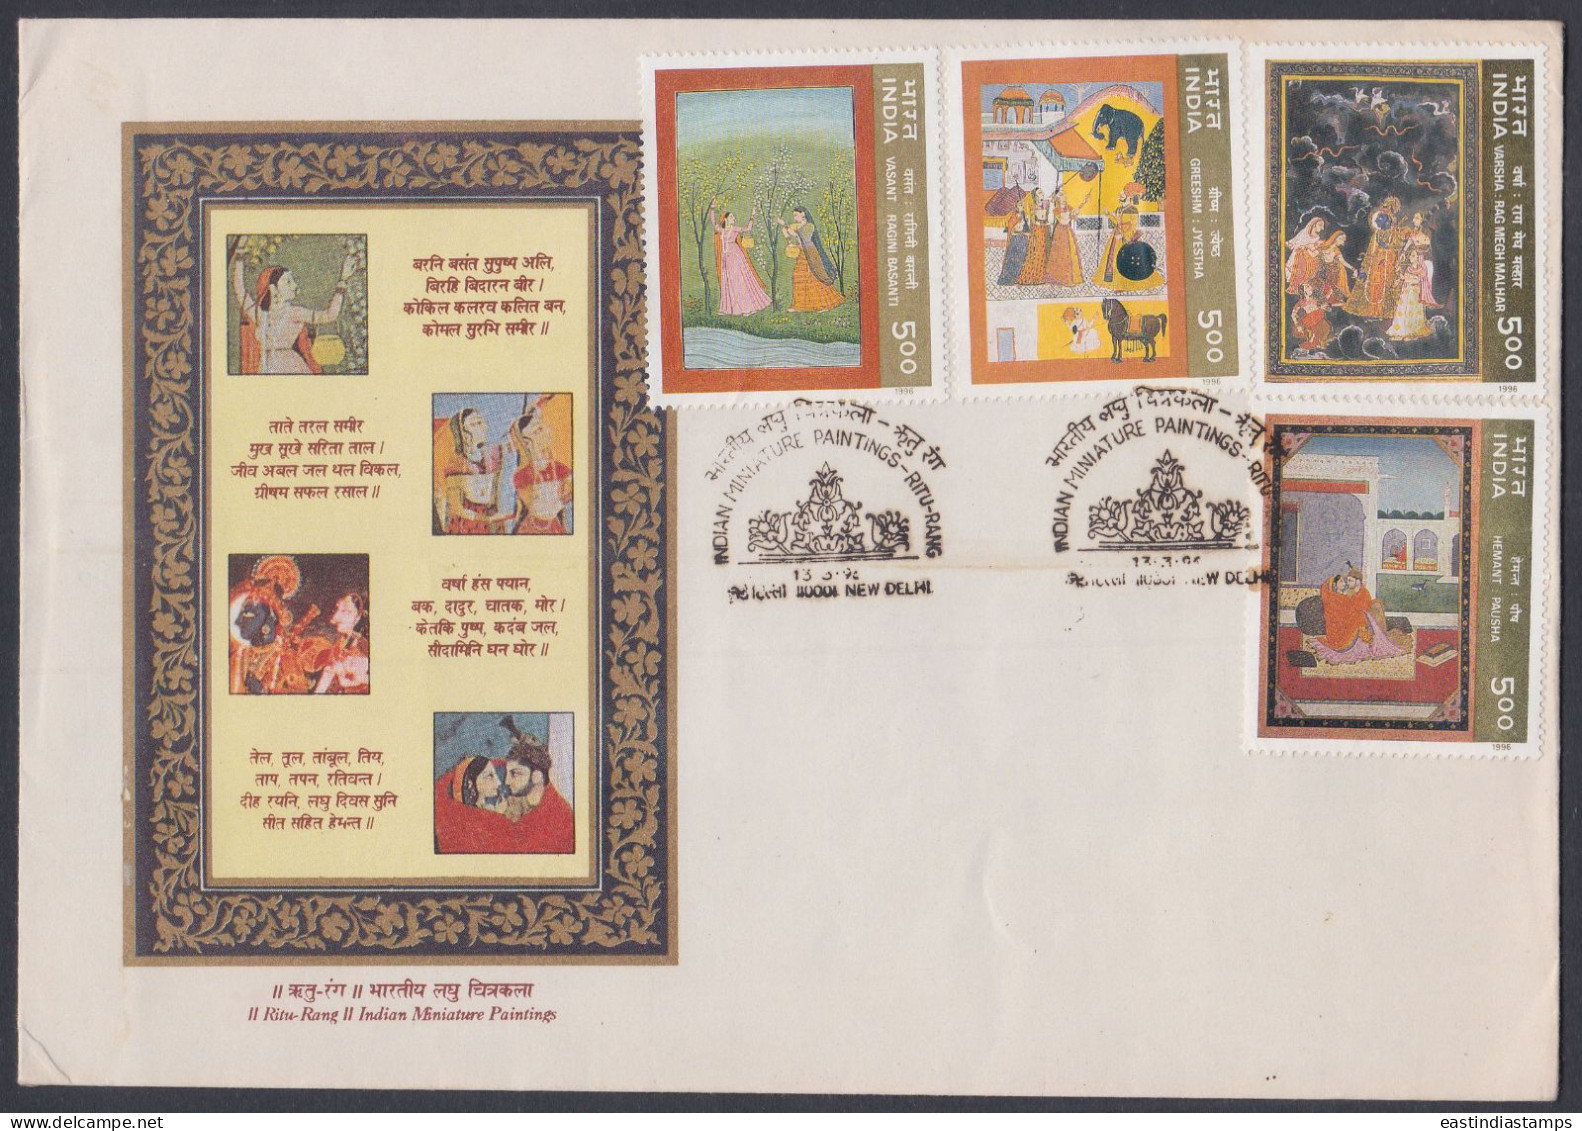 Inde India 1996 FDC Indian Miniature Paintings, Painting, Art, Arts, Painter, Horse, Royalty, Elephant, First Day Cover - Lettres & Documents